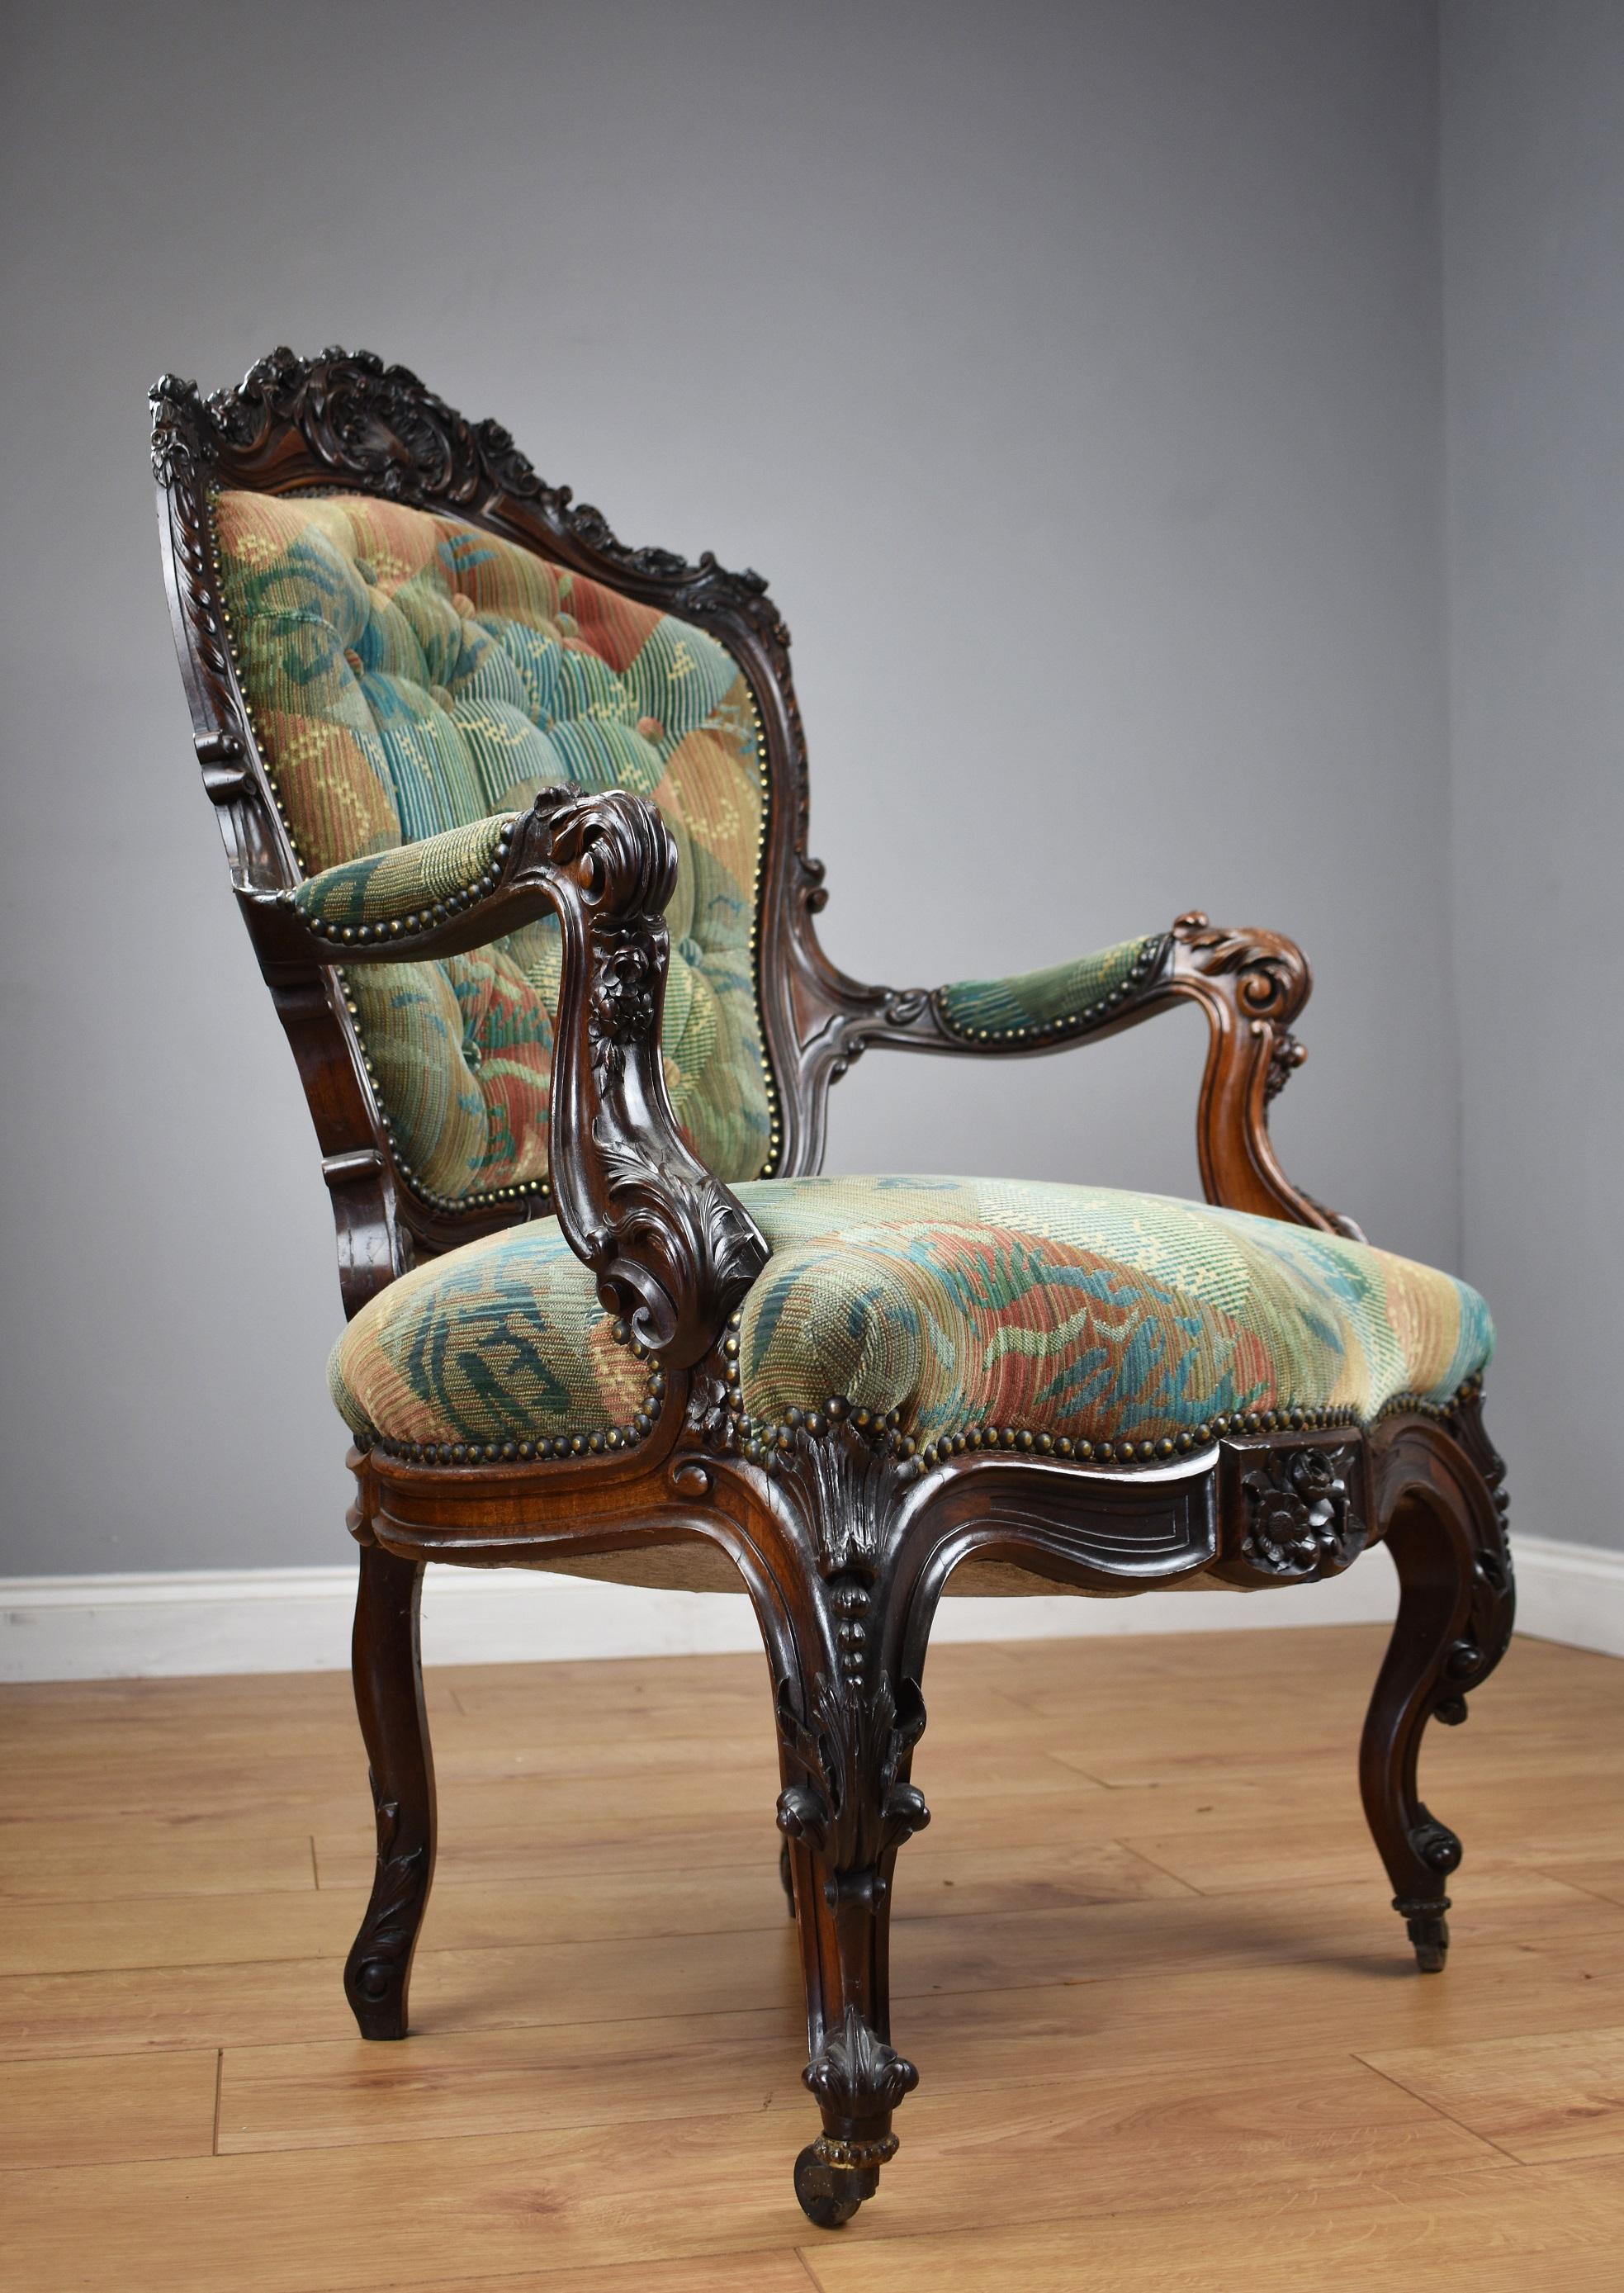 For sale is a fine quality Victorian solid rosewood show frame armchair, having an ornately shaped and carved back above upholstered seat, with two carved arm arms. The chair stands on elegant legs at the front, also profusely carved, with two